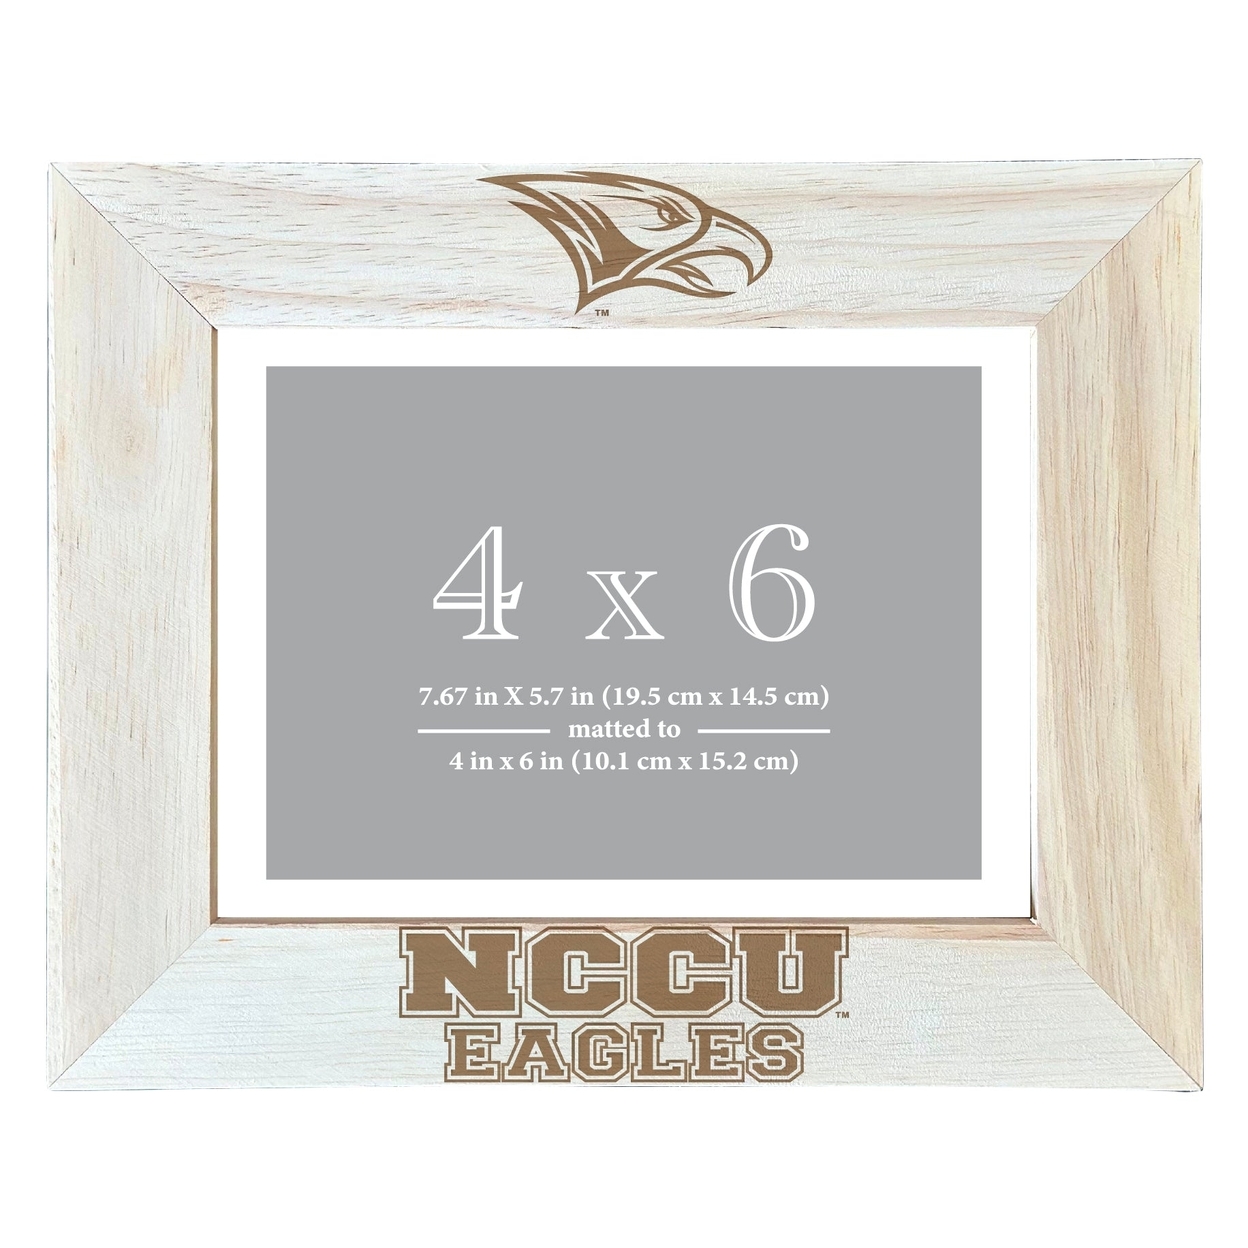 North Carolina Central Eagles Wooden Photo Frame Matted To 4 X 6 Inch - Etched